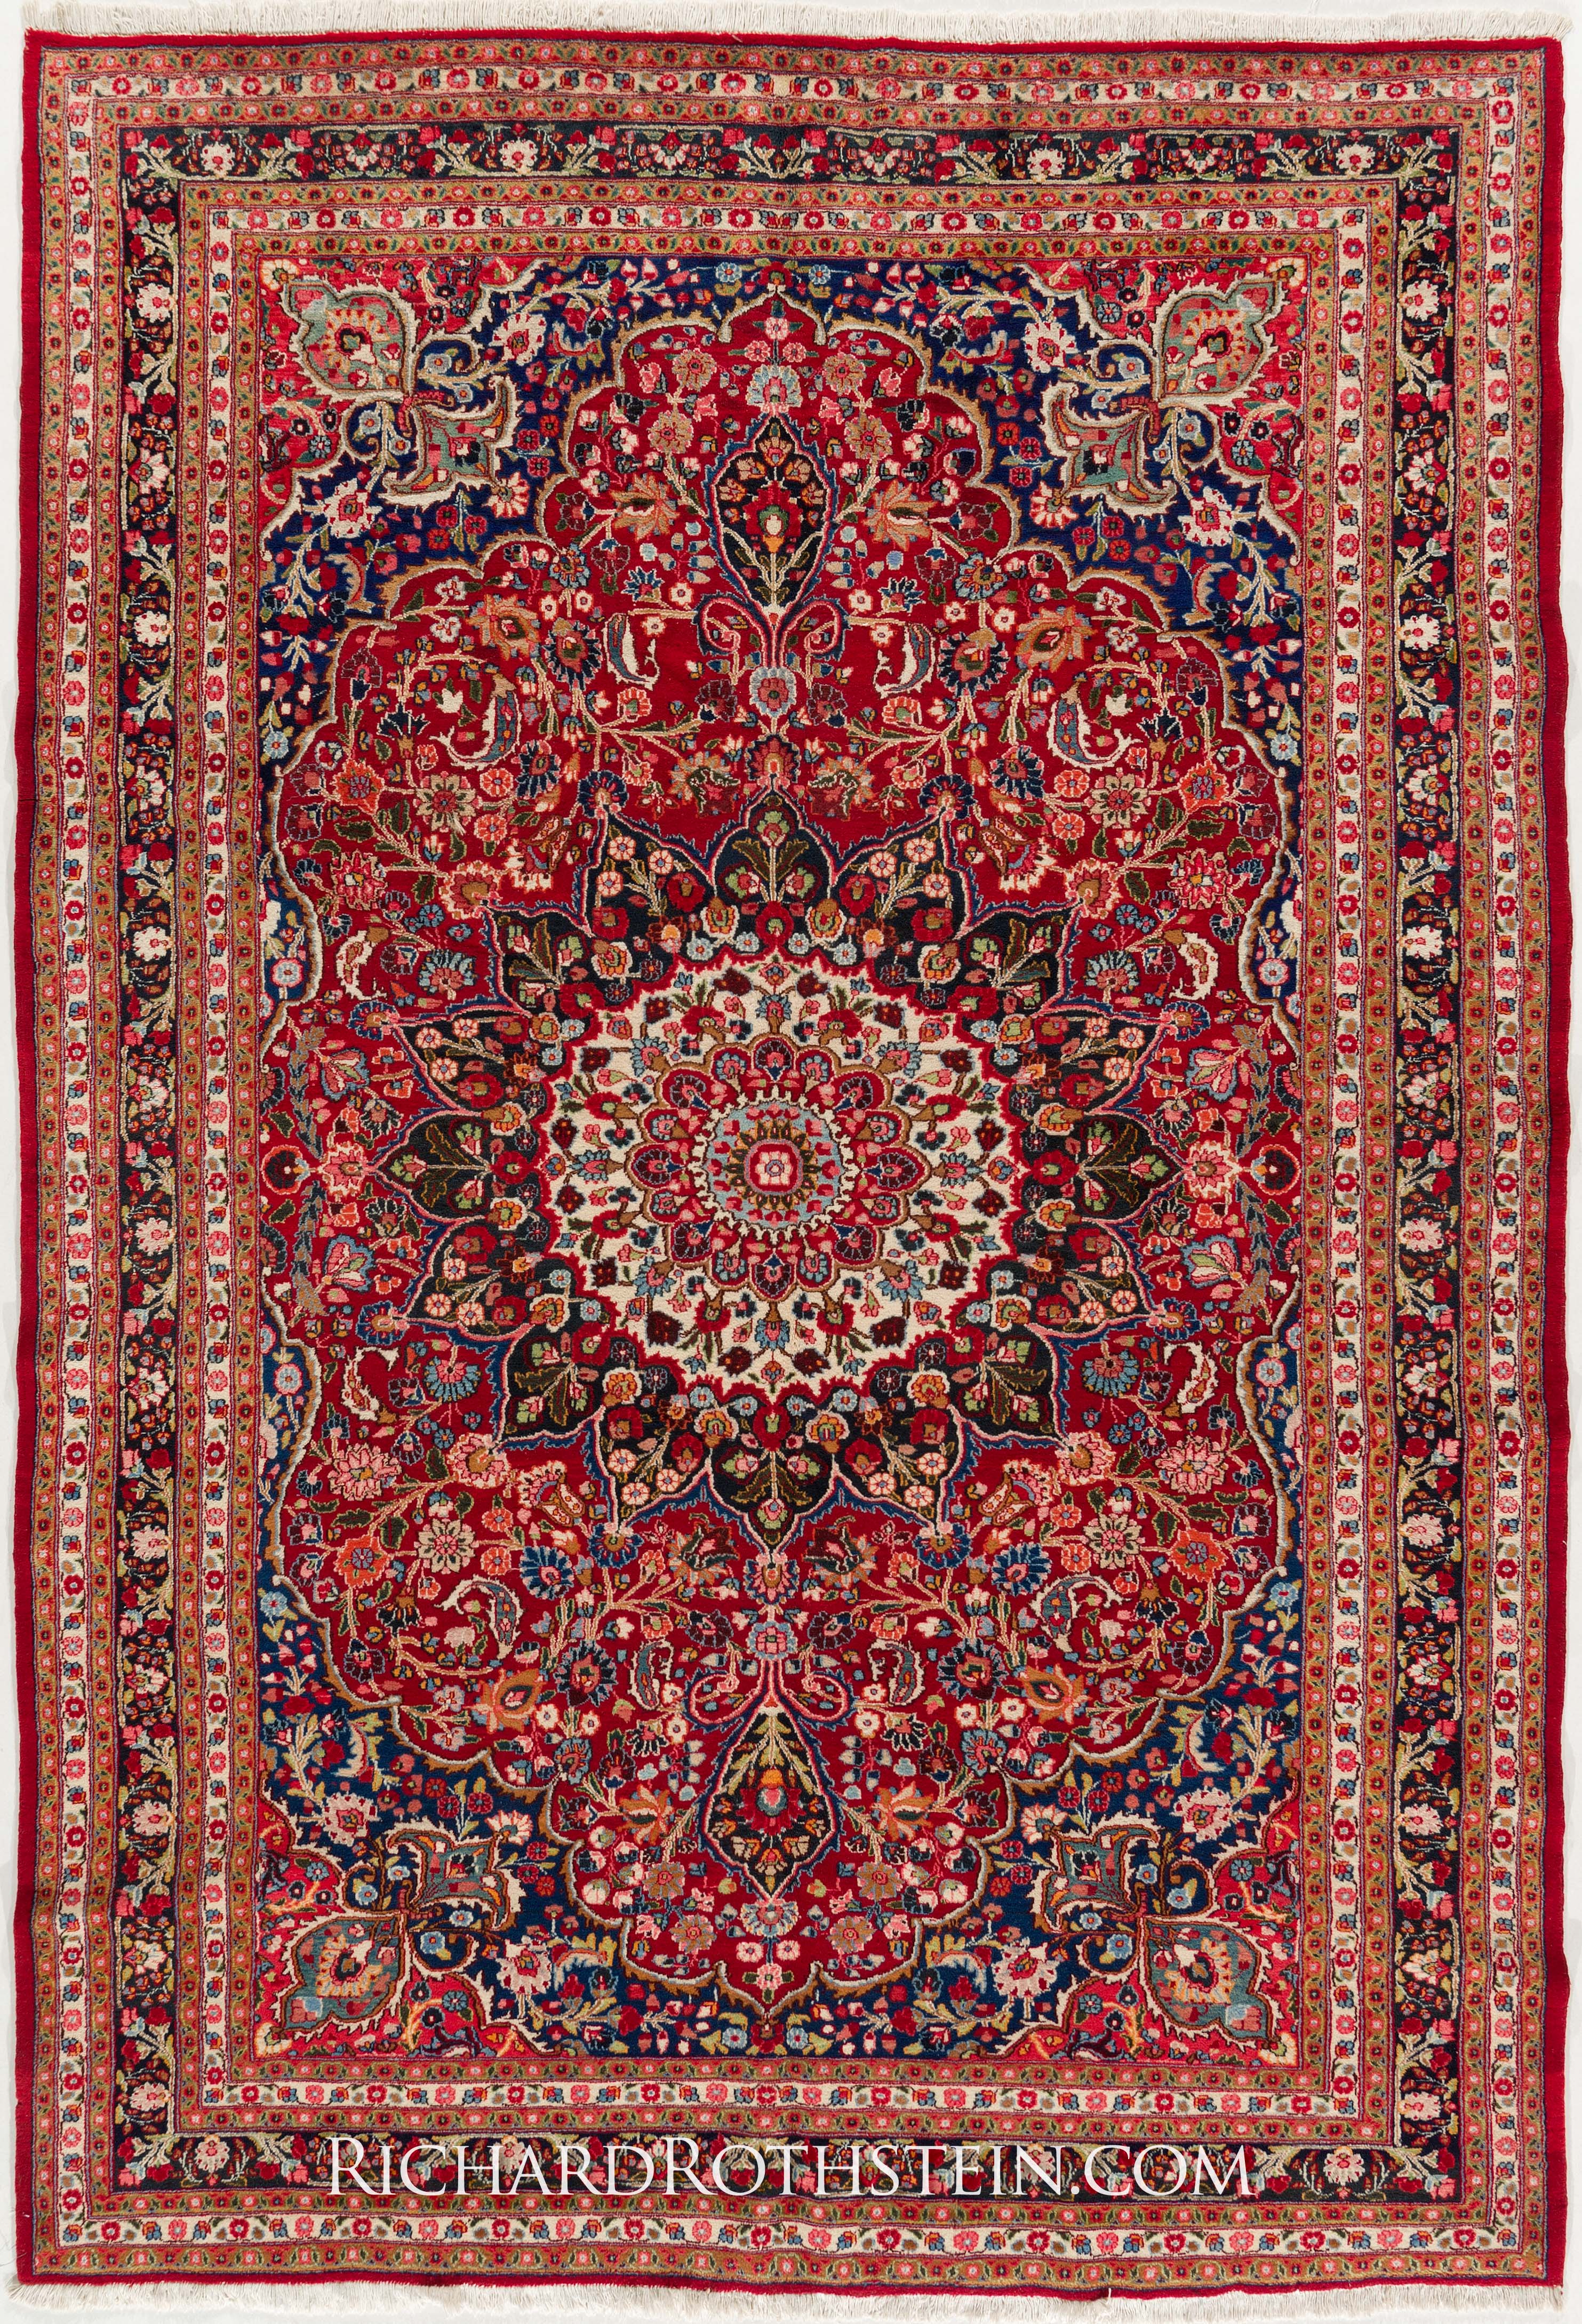 Oriental rugs buy a precious possession of your home to be the envy of others - Persian rug YIQJZCS